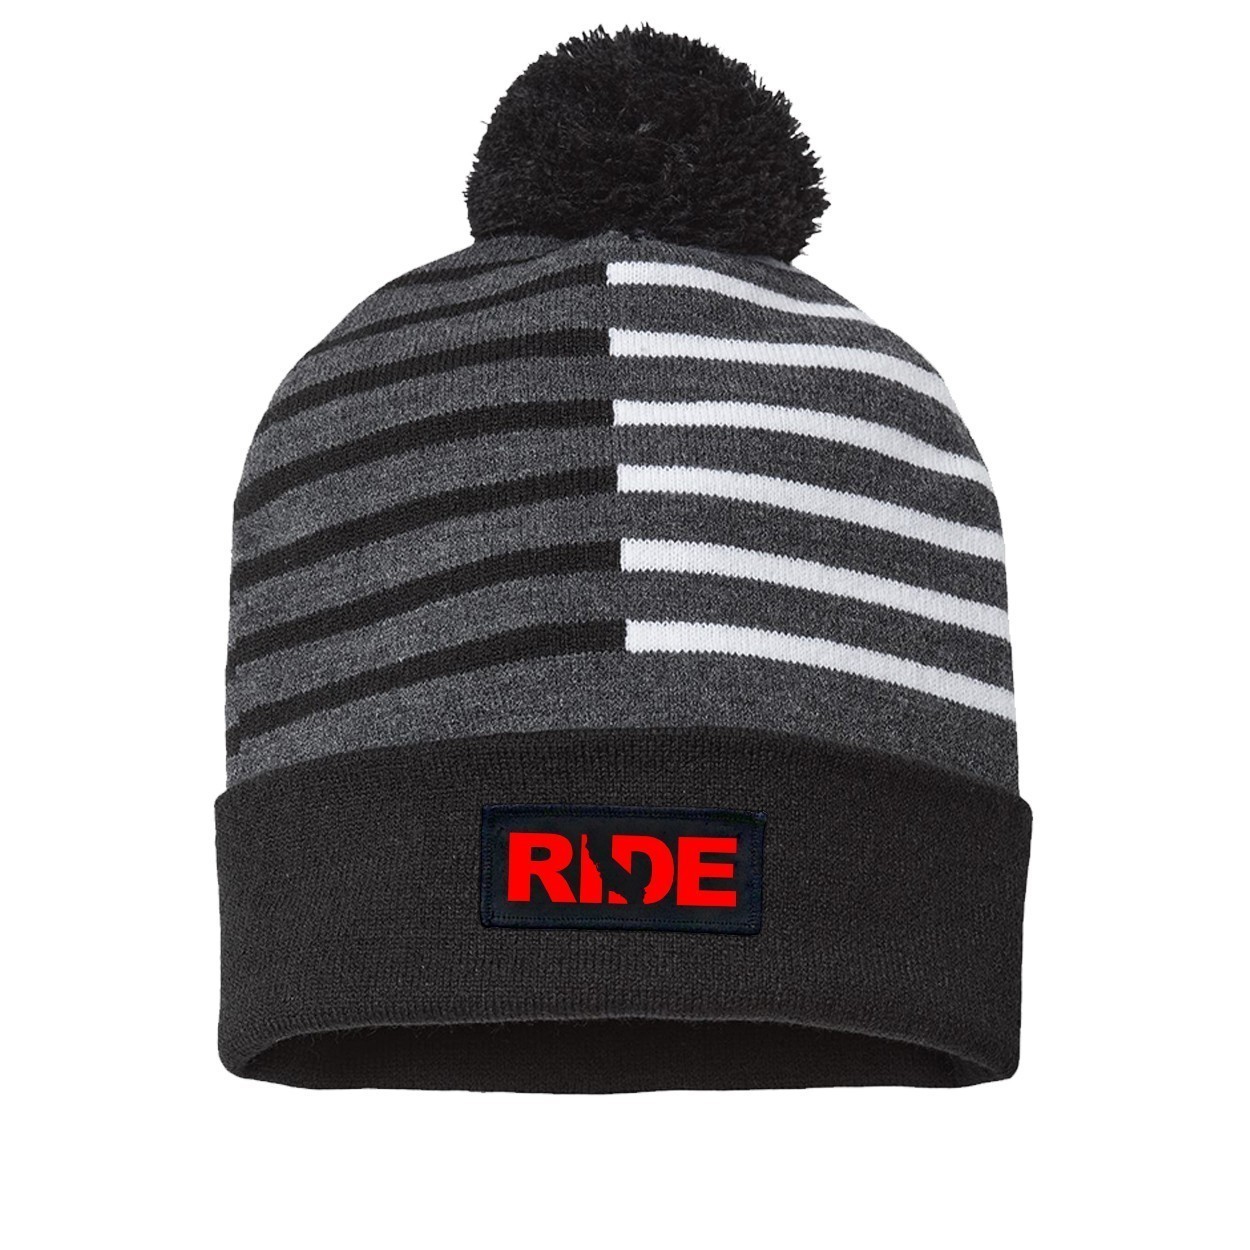 Ride California Night Out Woven Patch Roll Up Pom Knit Beanie Half Color Black/White (Red Logo)